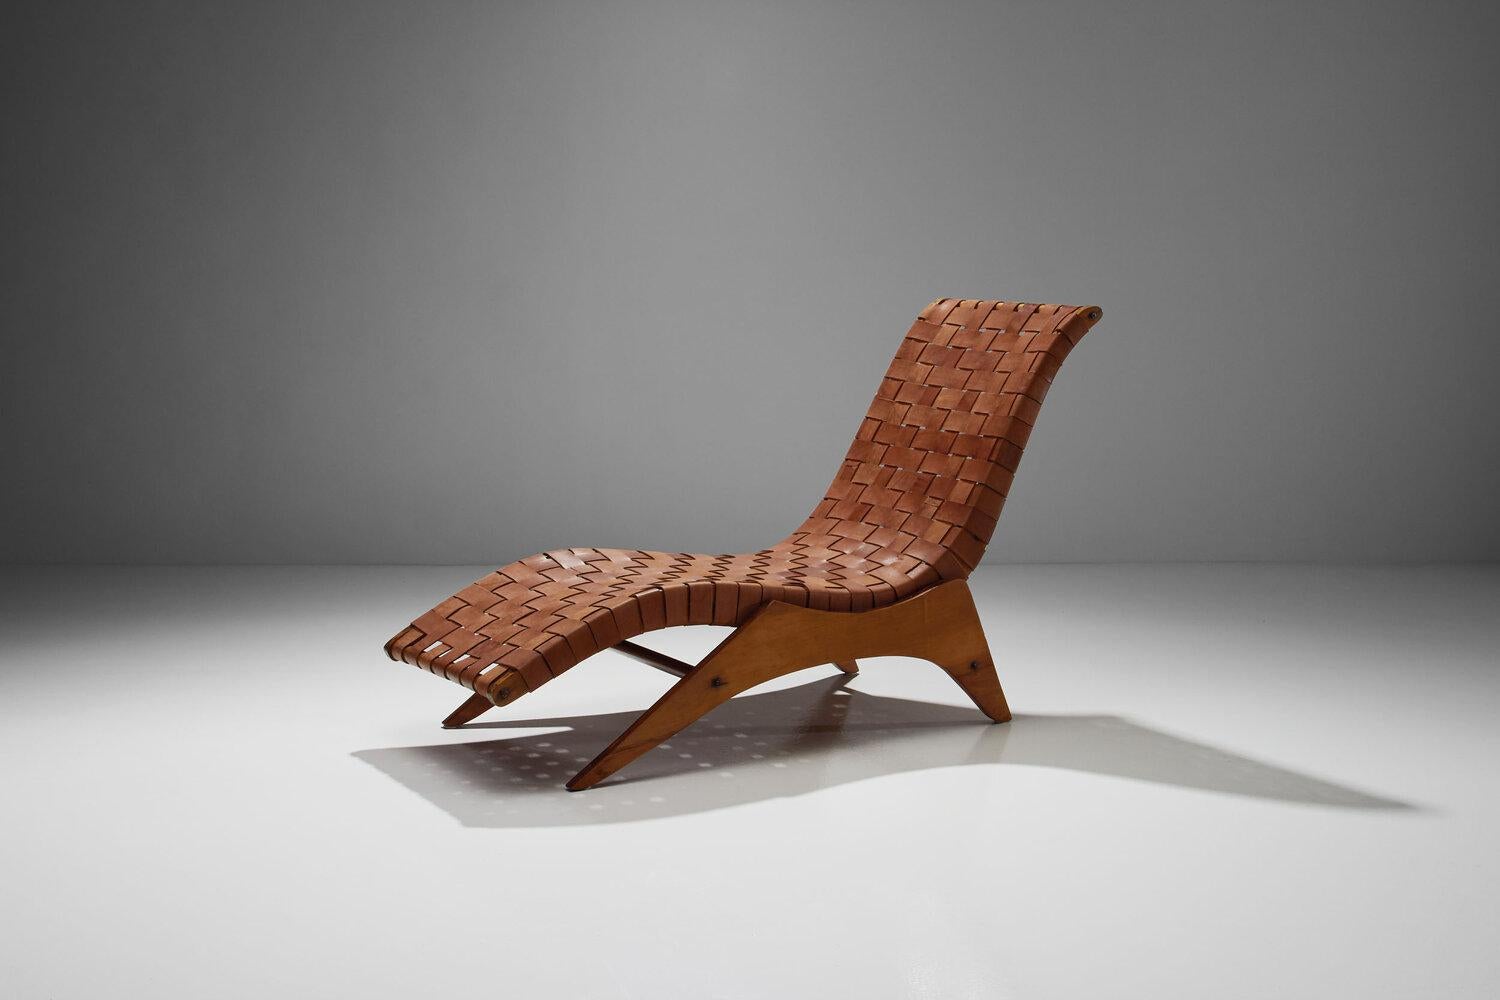 This rare José Zanine Caldas lounge chair is an exceptional example of Brazilian design of the 1950s. The woven leather straps and the organic shape is unmatched.

This large lounge chair is made of plywood and features a distinctive, curved